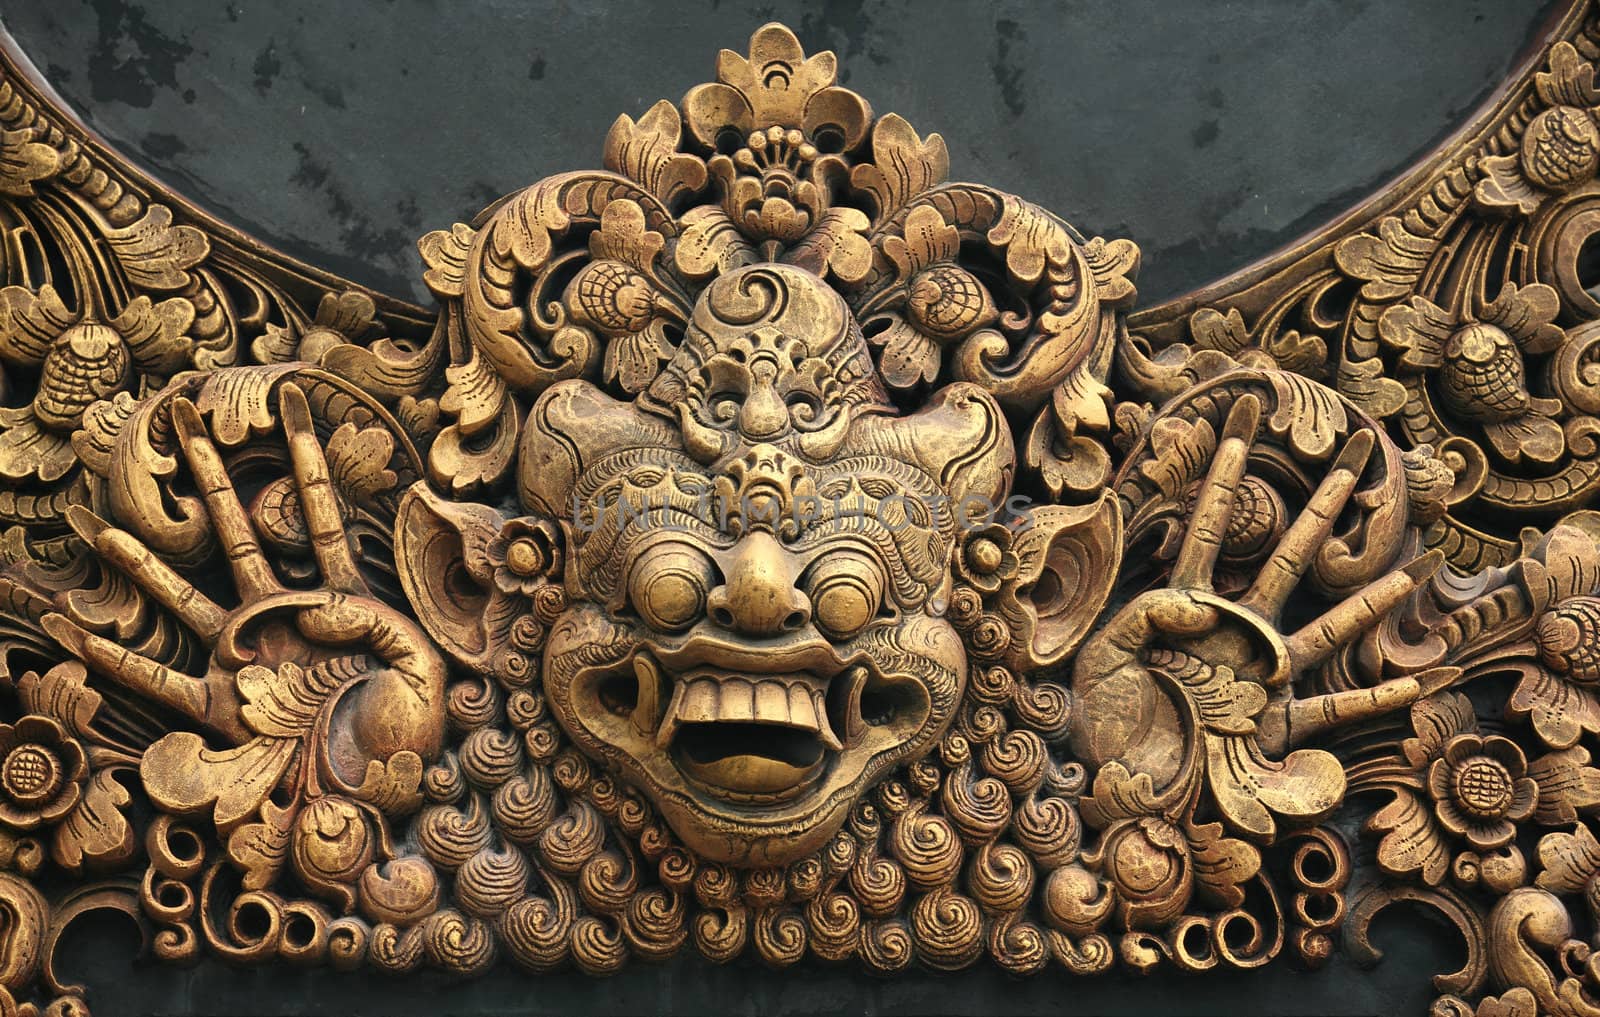 Hundreds years old carving at Pura in Bali, Indonesia